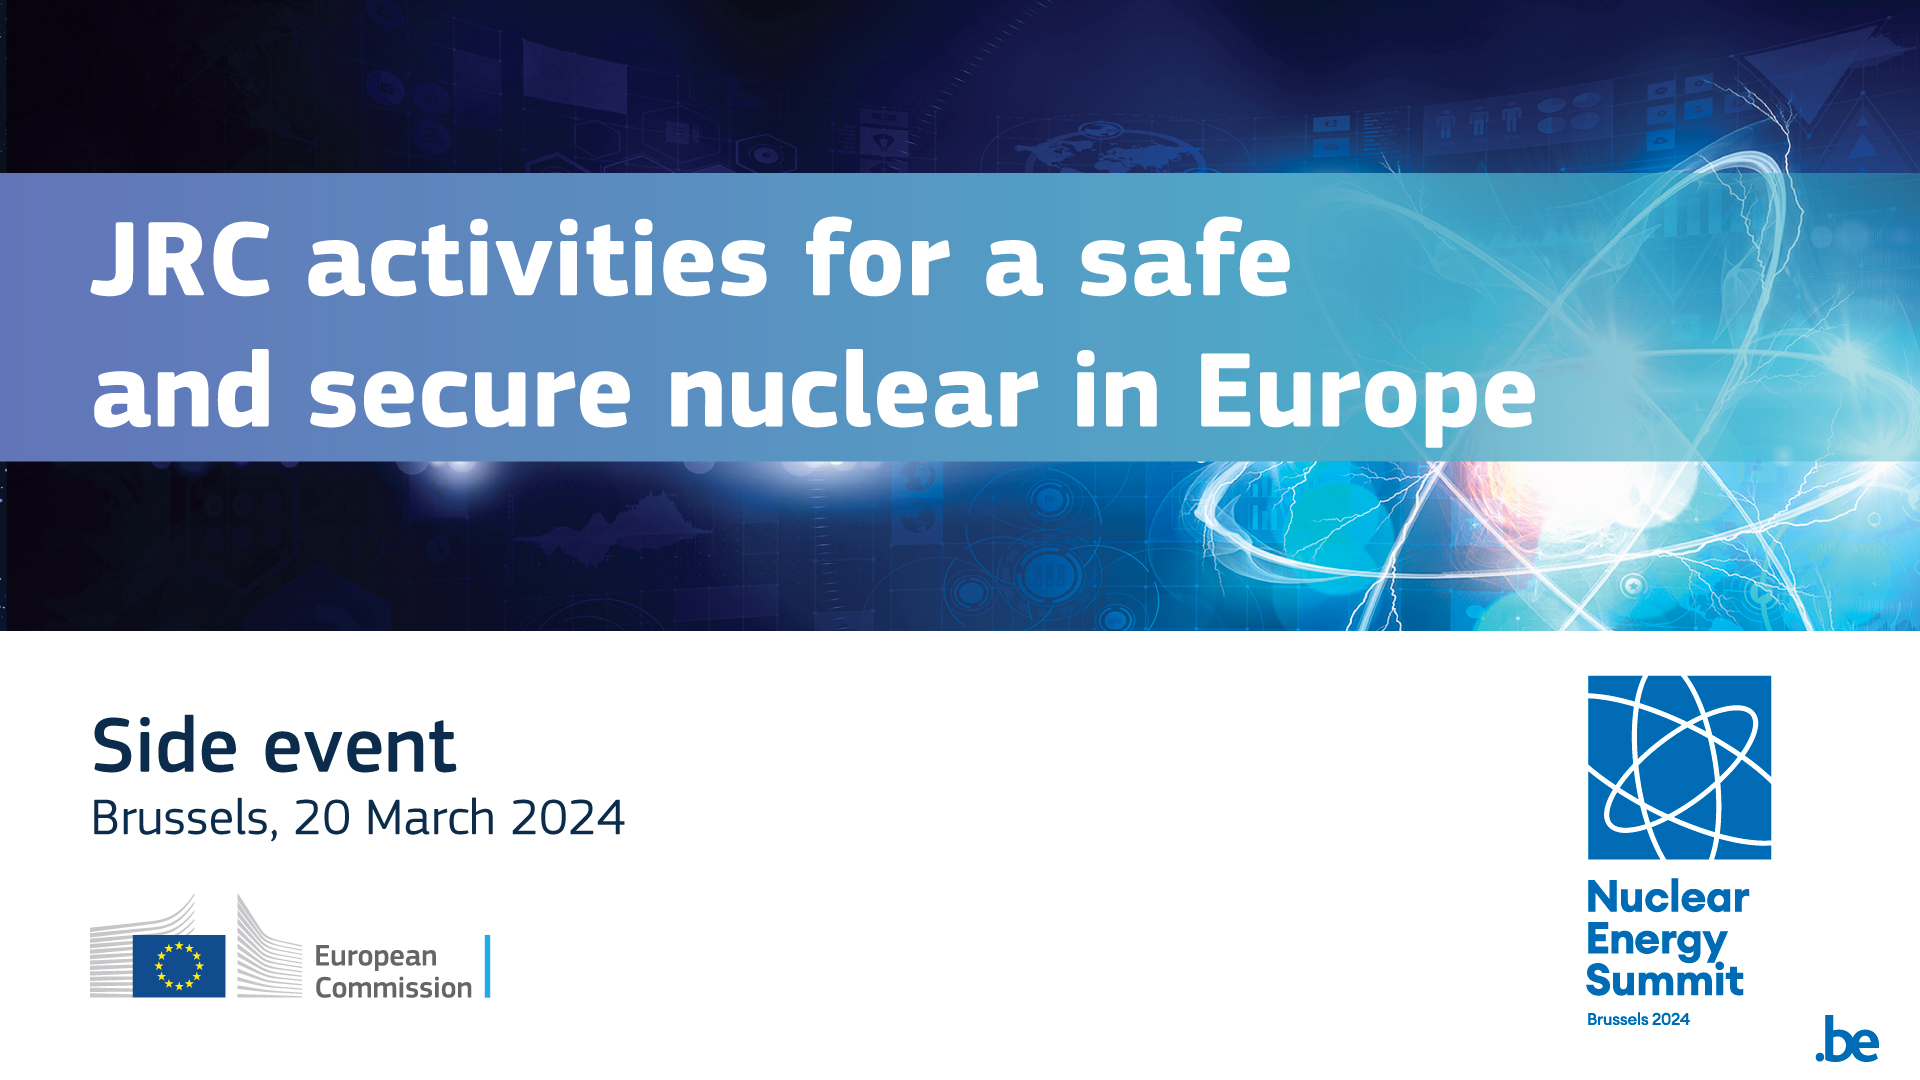 JRC activities for a safe and secure nuclear in Europe